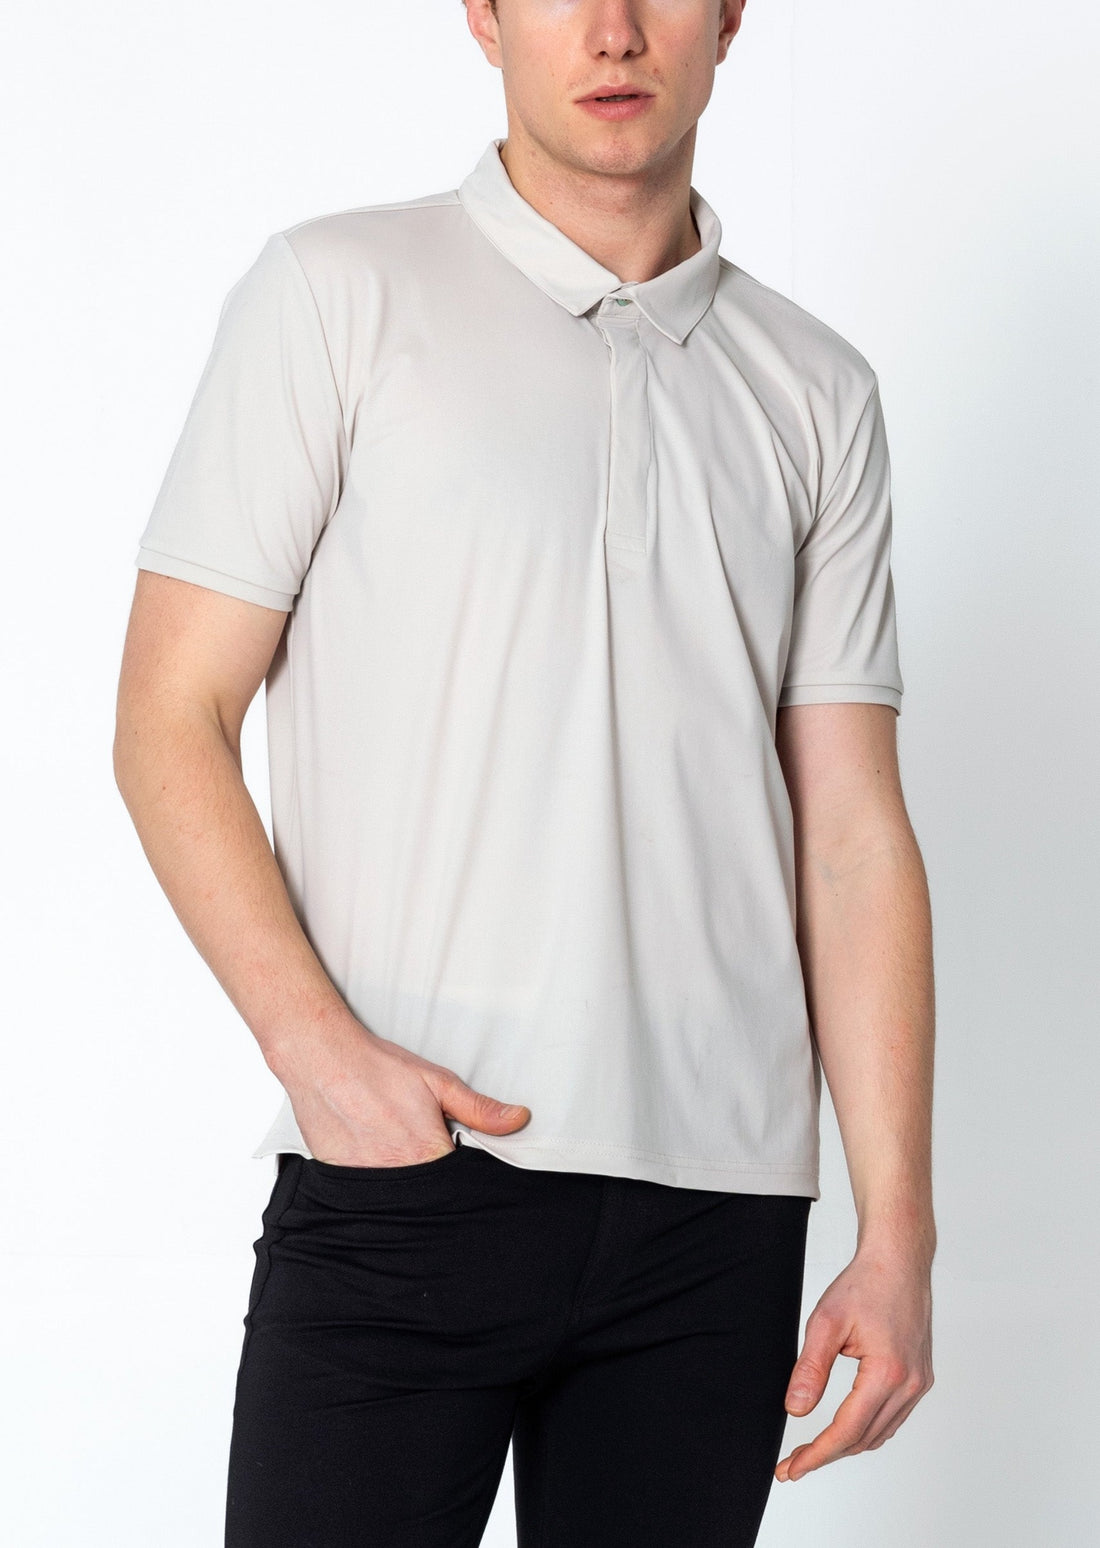 Wrinkle Free Tapered Travel Polo Shirts - Stone